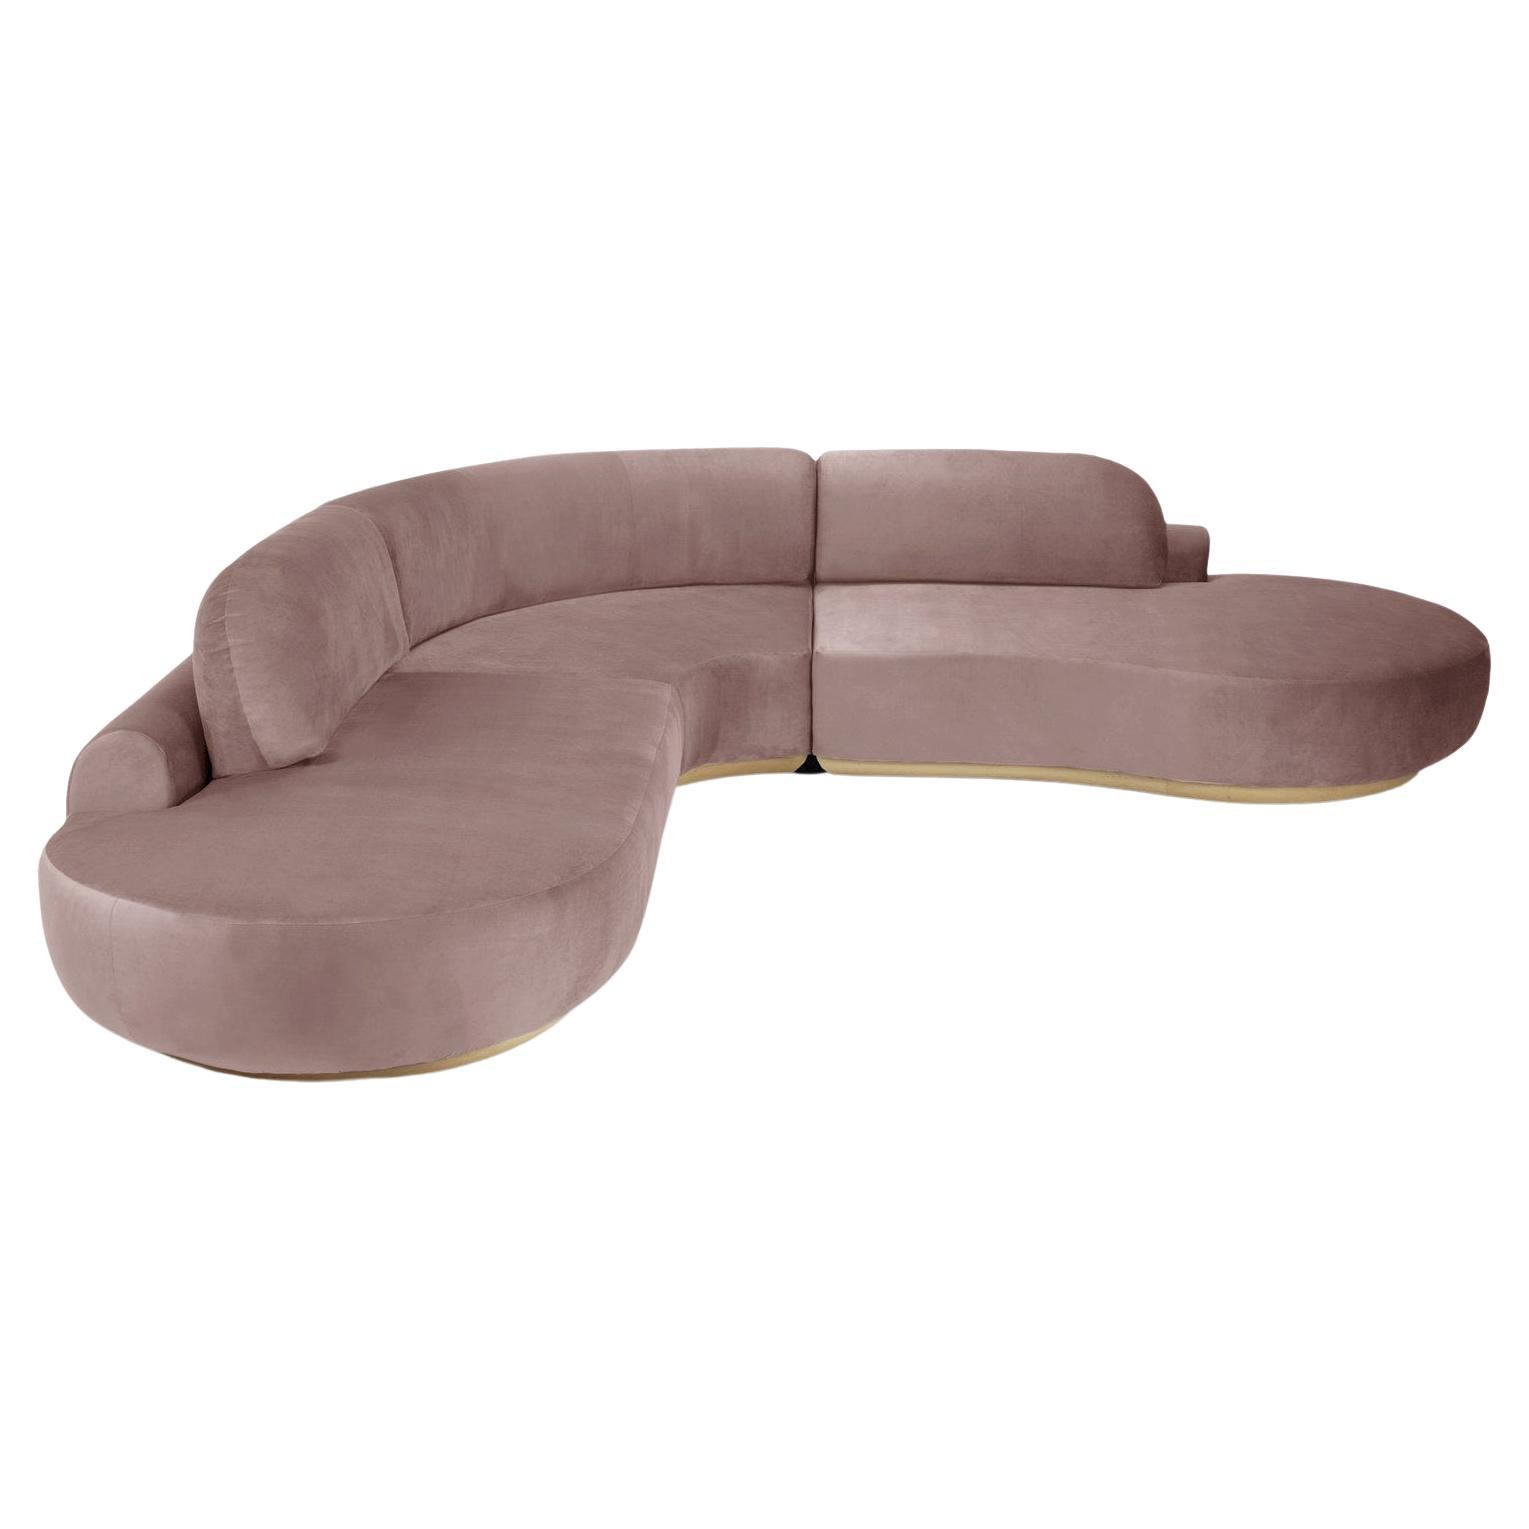 Naked Curved Sectional Sofa, 3 Piece with Natural Oak and Barcelona Lotus For Sale